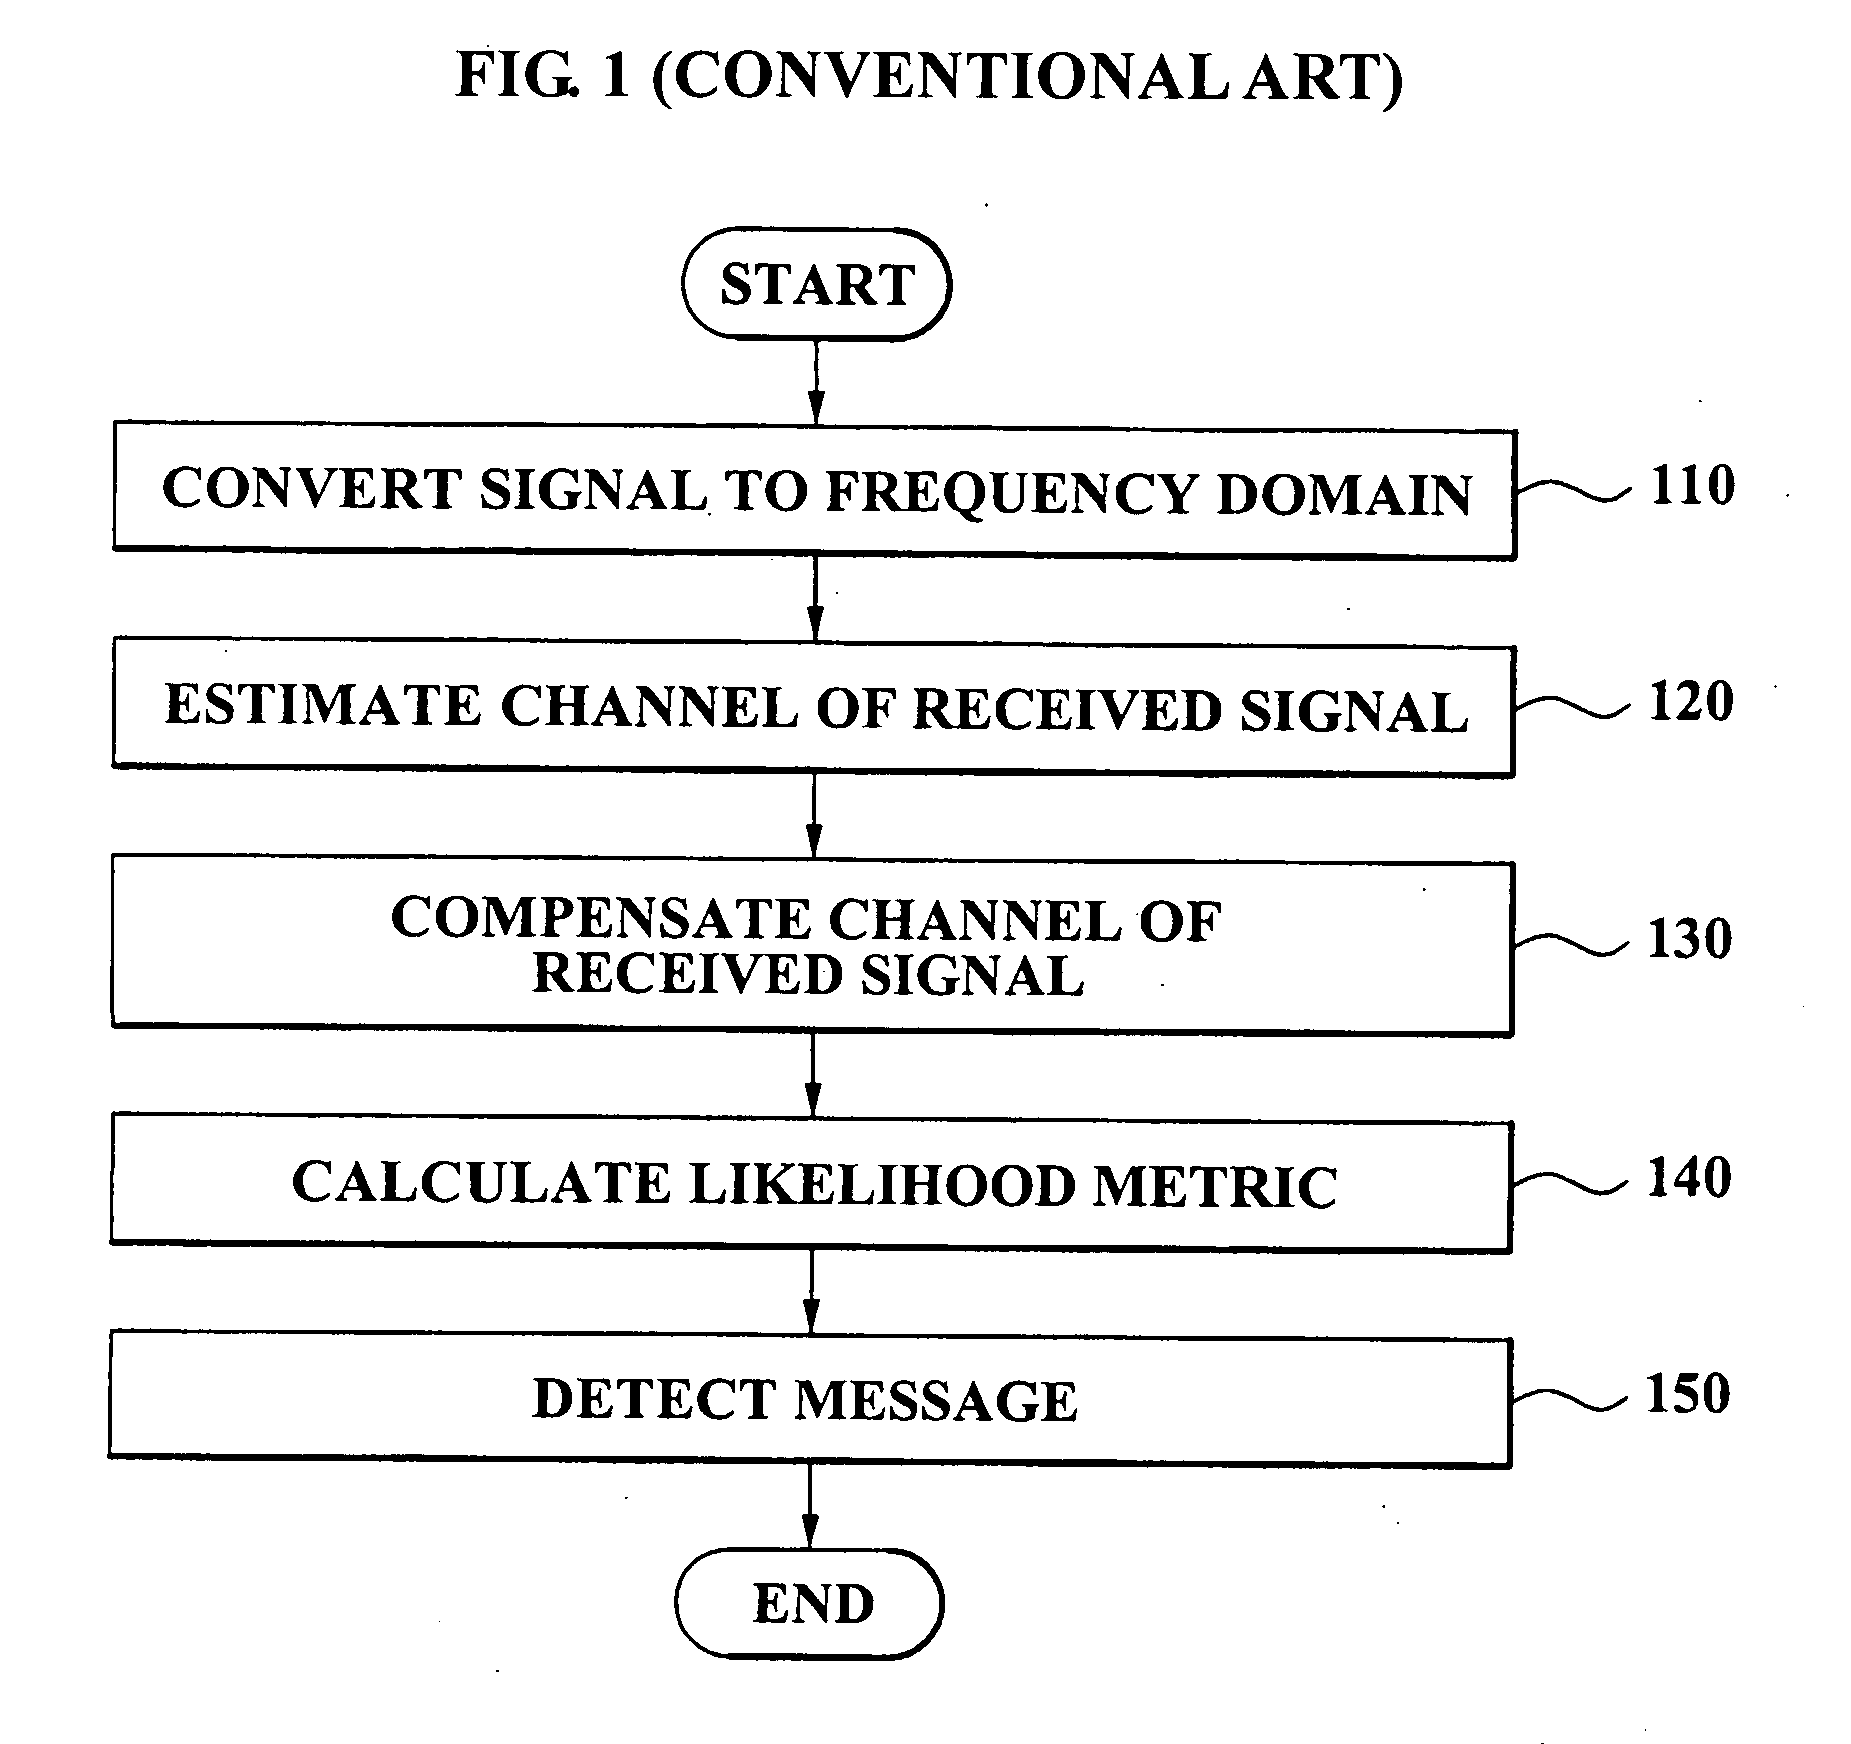 Method and apparatus for calculating likelihood metric of a received signal in a digital communication system